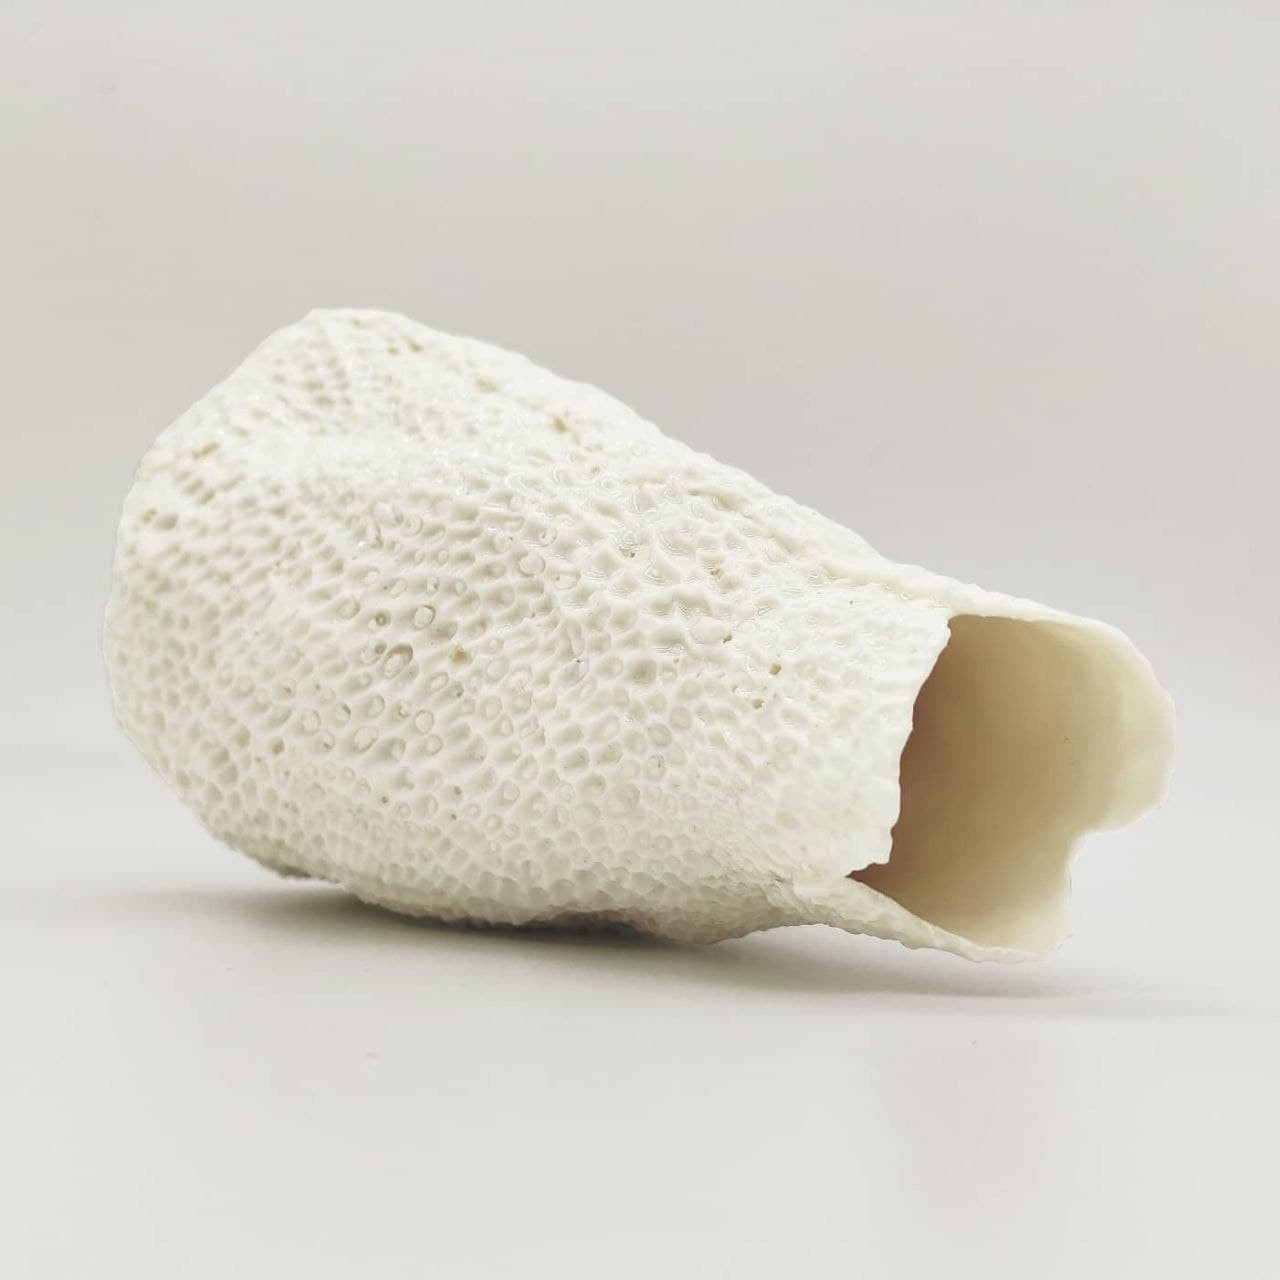 Arndt: The porcelain vases "Pieces of Nature" with shell surface allow a unique visual and at the same time haptic experience.